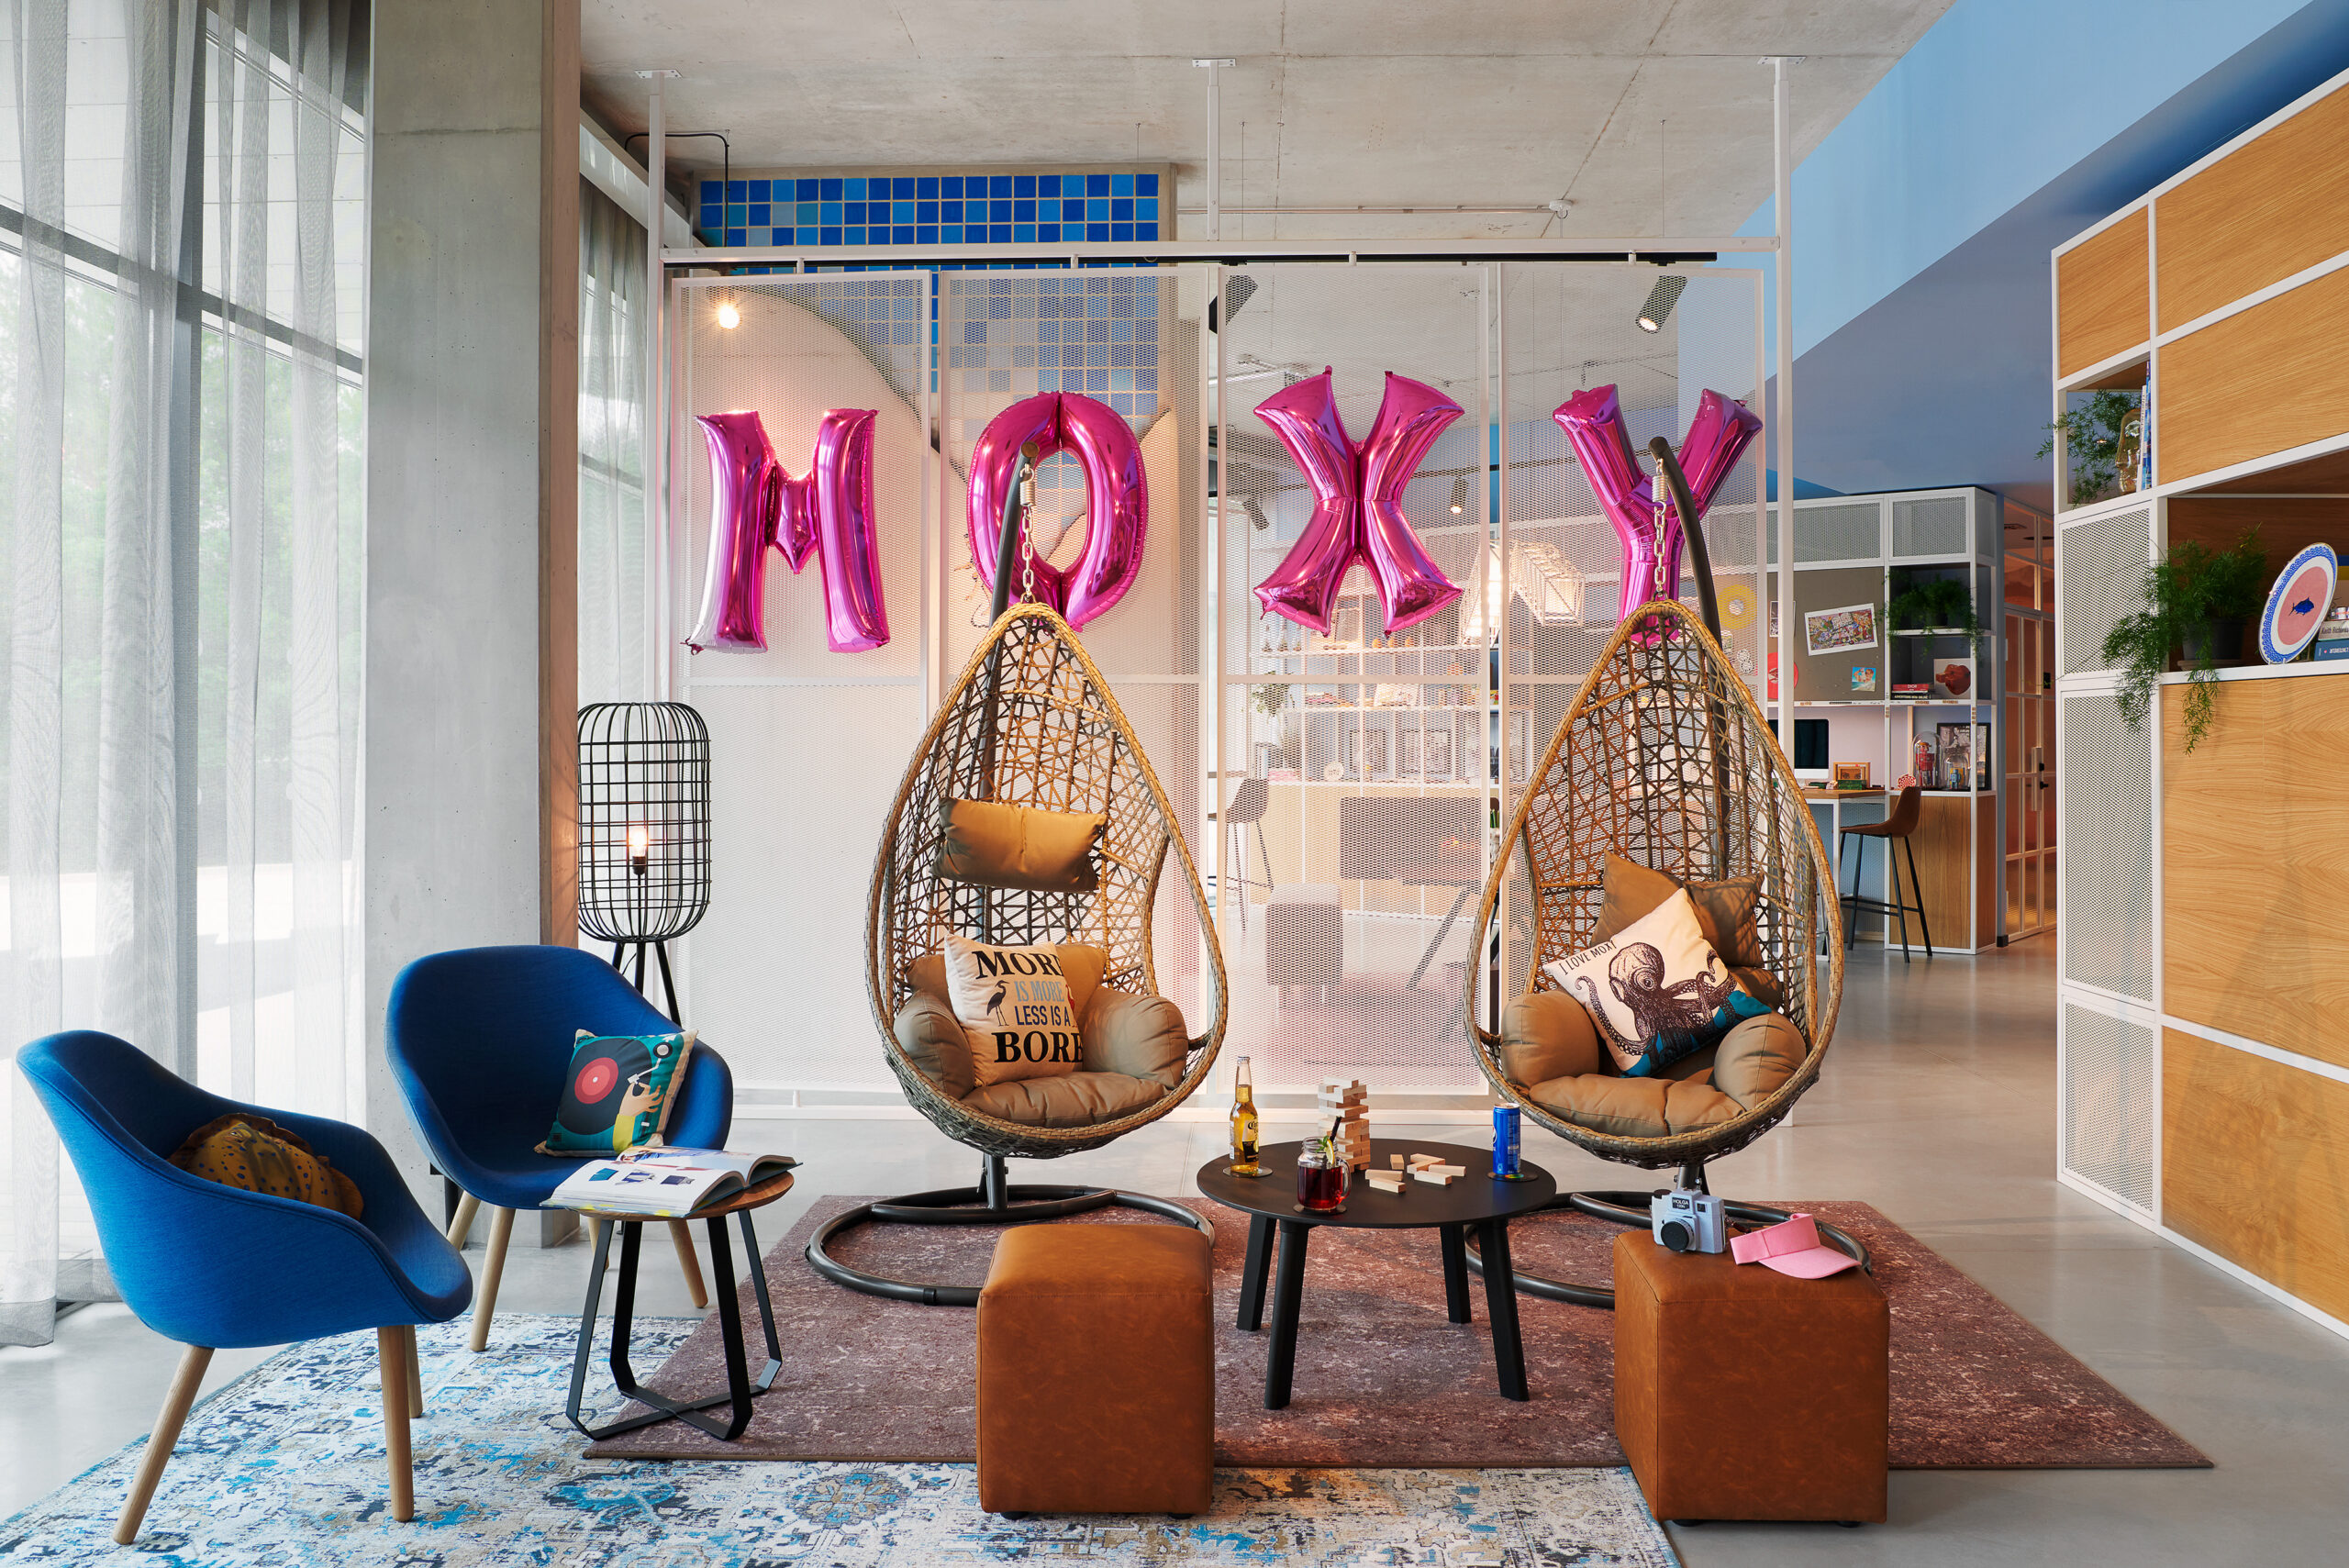 HOTEL CO 51 REFLECTS ON YEAR OF GROWTH FOR MOXY & COURTYARD BRANDS